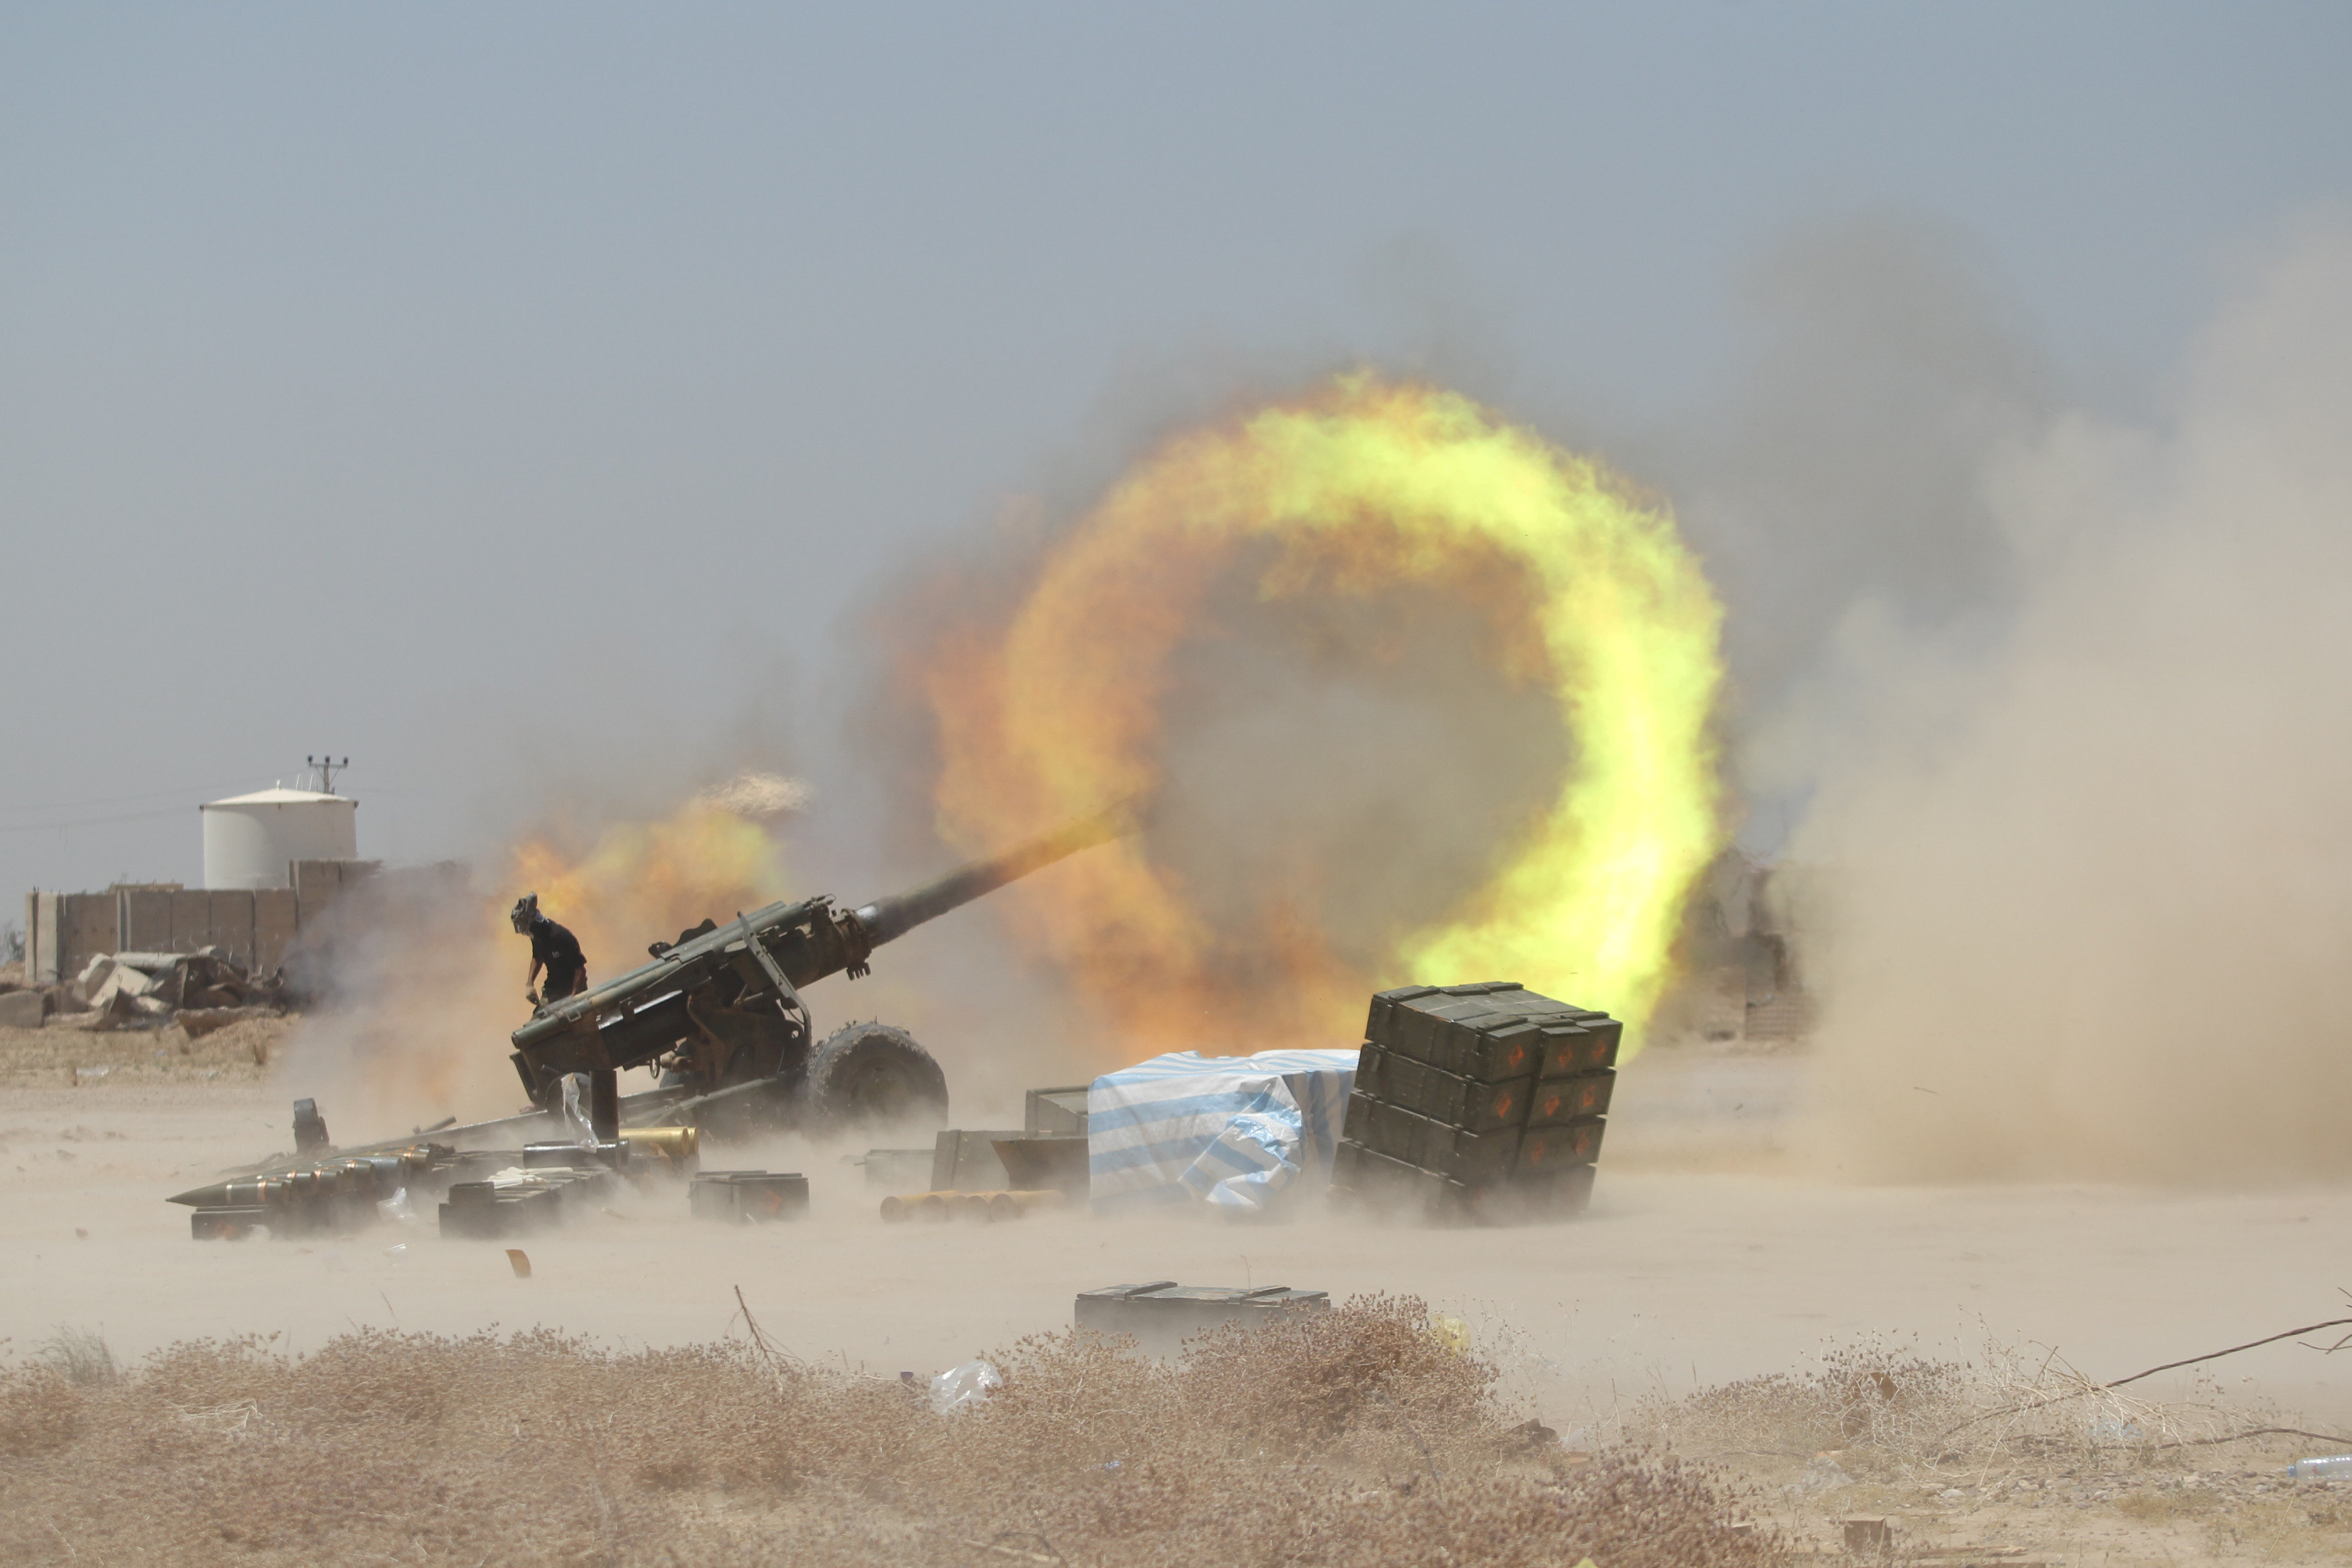 An Iraqi Shi'ite fighter fires artillery during clashes with Islamic State militants near Falluja, Iraq, May 29, 2016. To match Special Report IRAQ-MASSACRES/FALLUJA REUTERS/Staff/File Photo TO MATCH SPECIAL REPORT XXX TPX IMAGES OF THE DAY